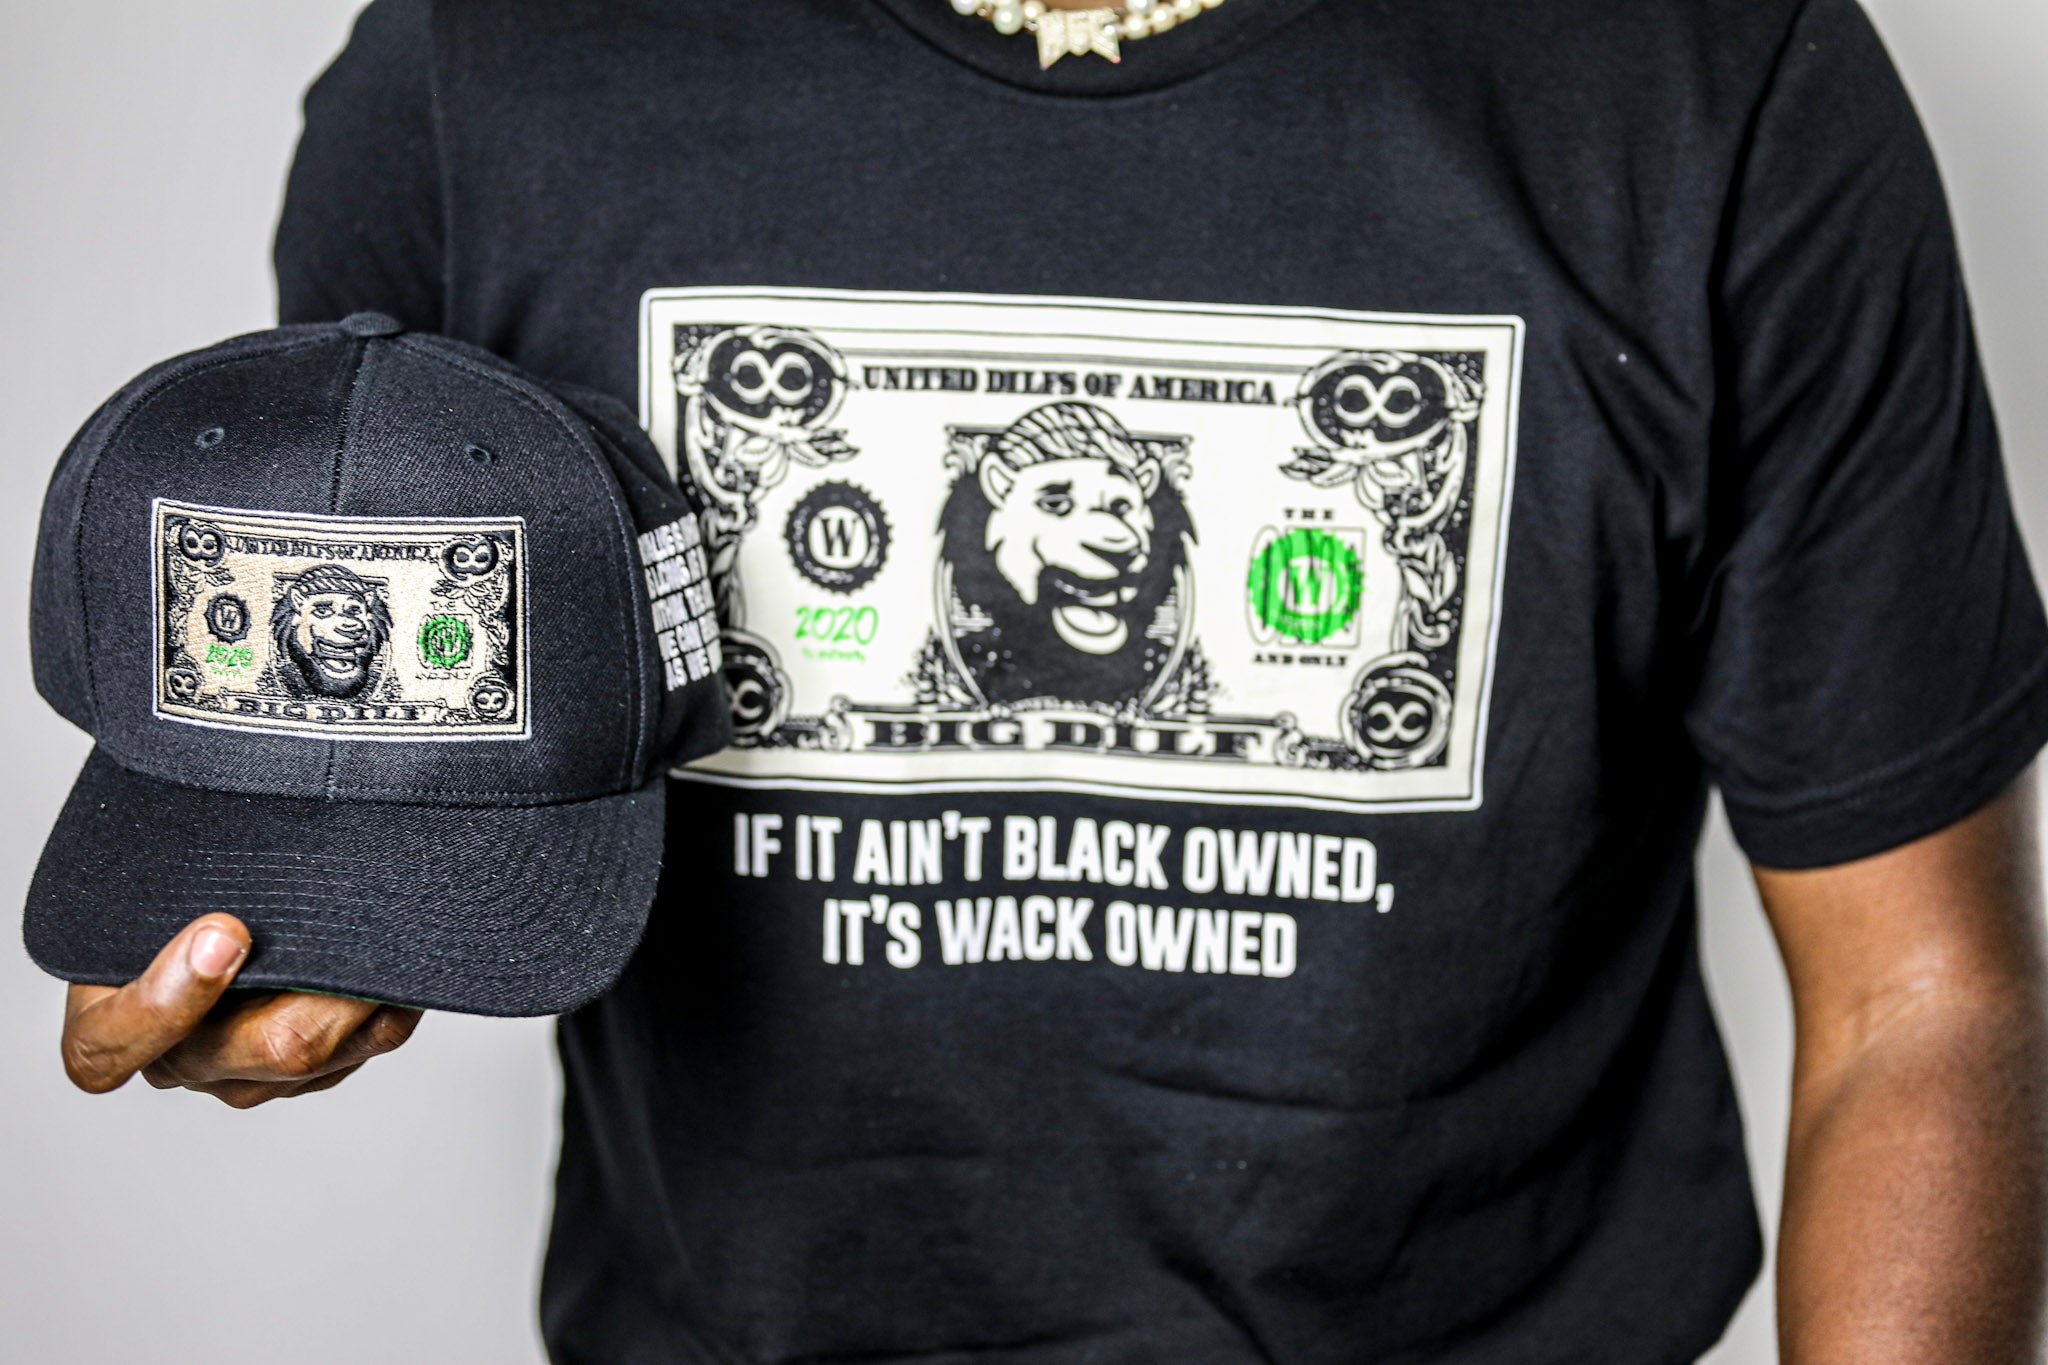 Black Owned, Wack Owned Shirt